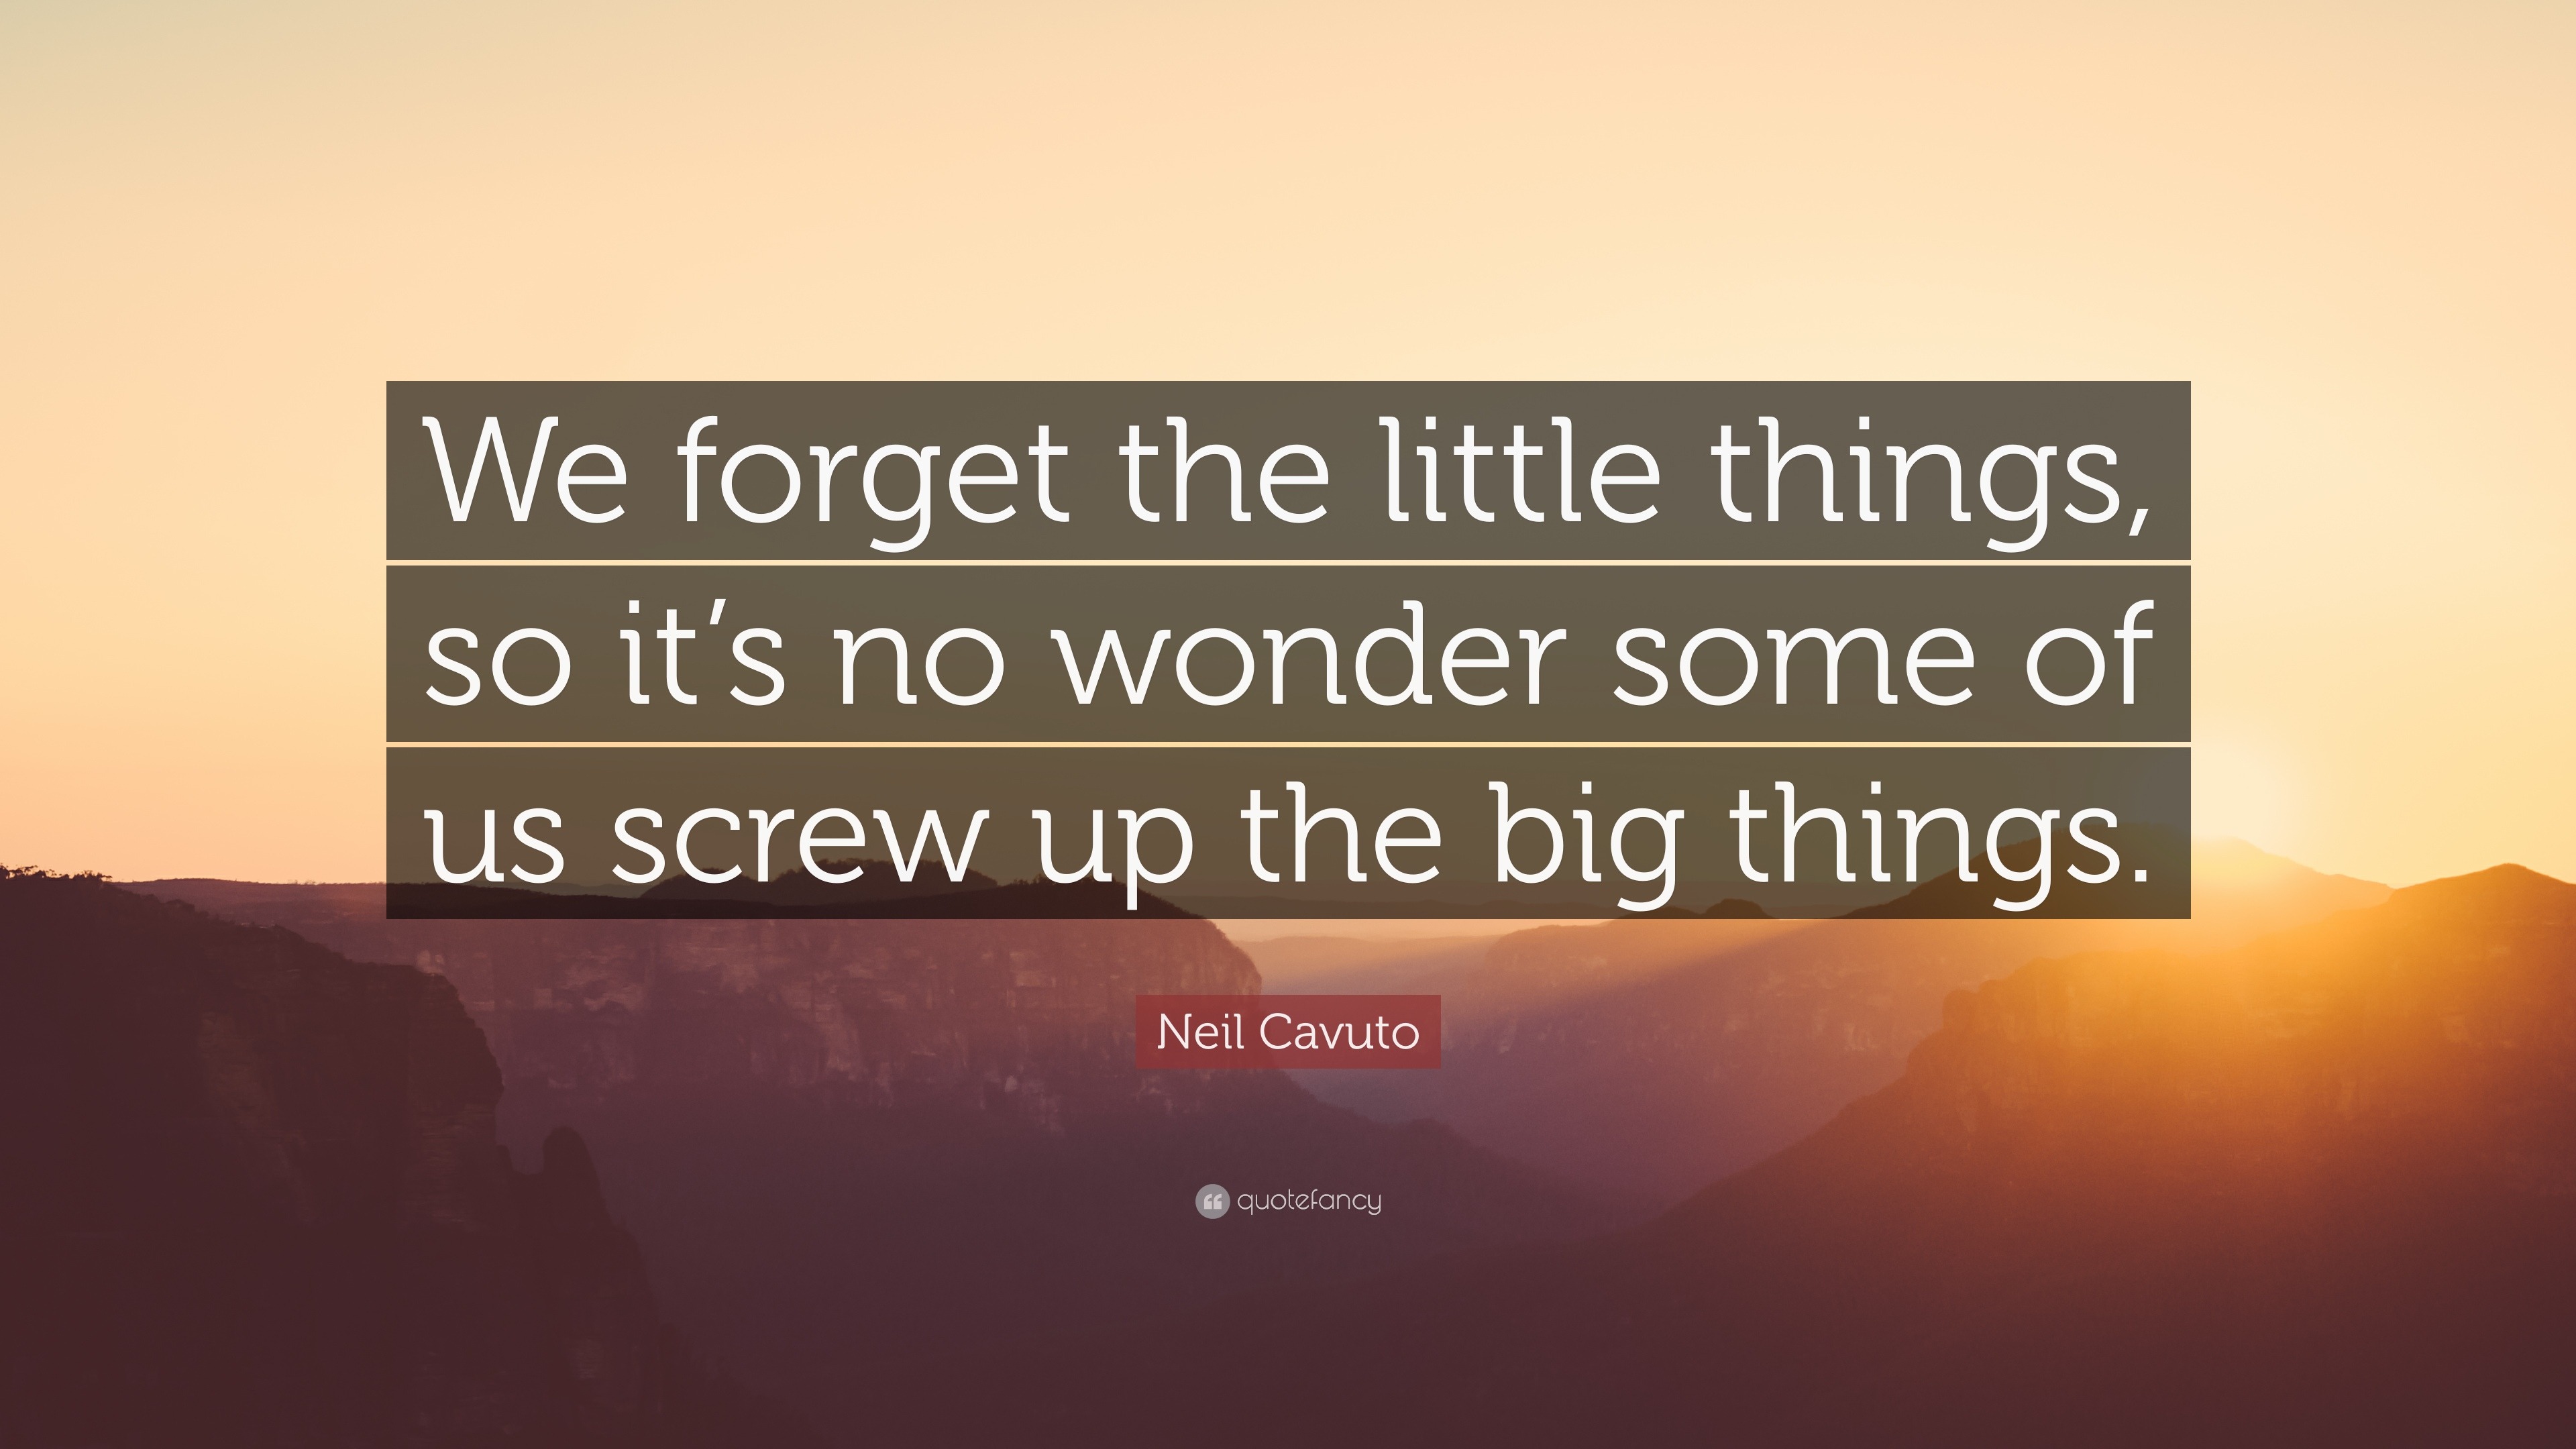 https://quotefancy.com/media/wallpaper/3840x2160/873744-Neil-Cavuto-Quote-We-forget-the-little-things-so-it-s-no-wonder.jpg